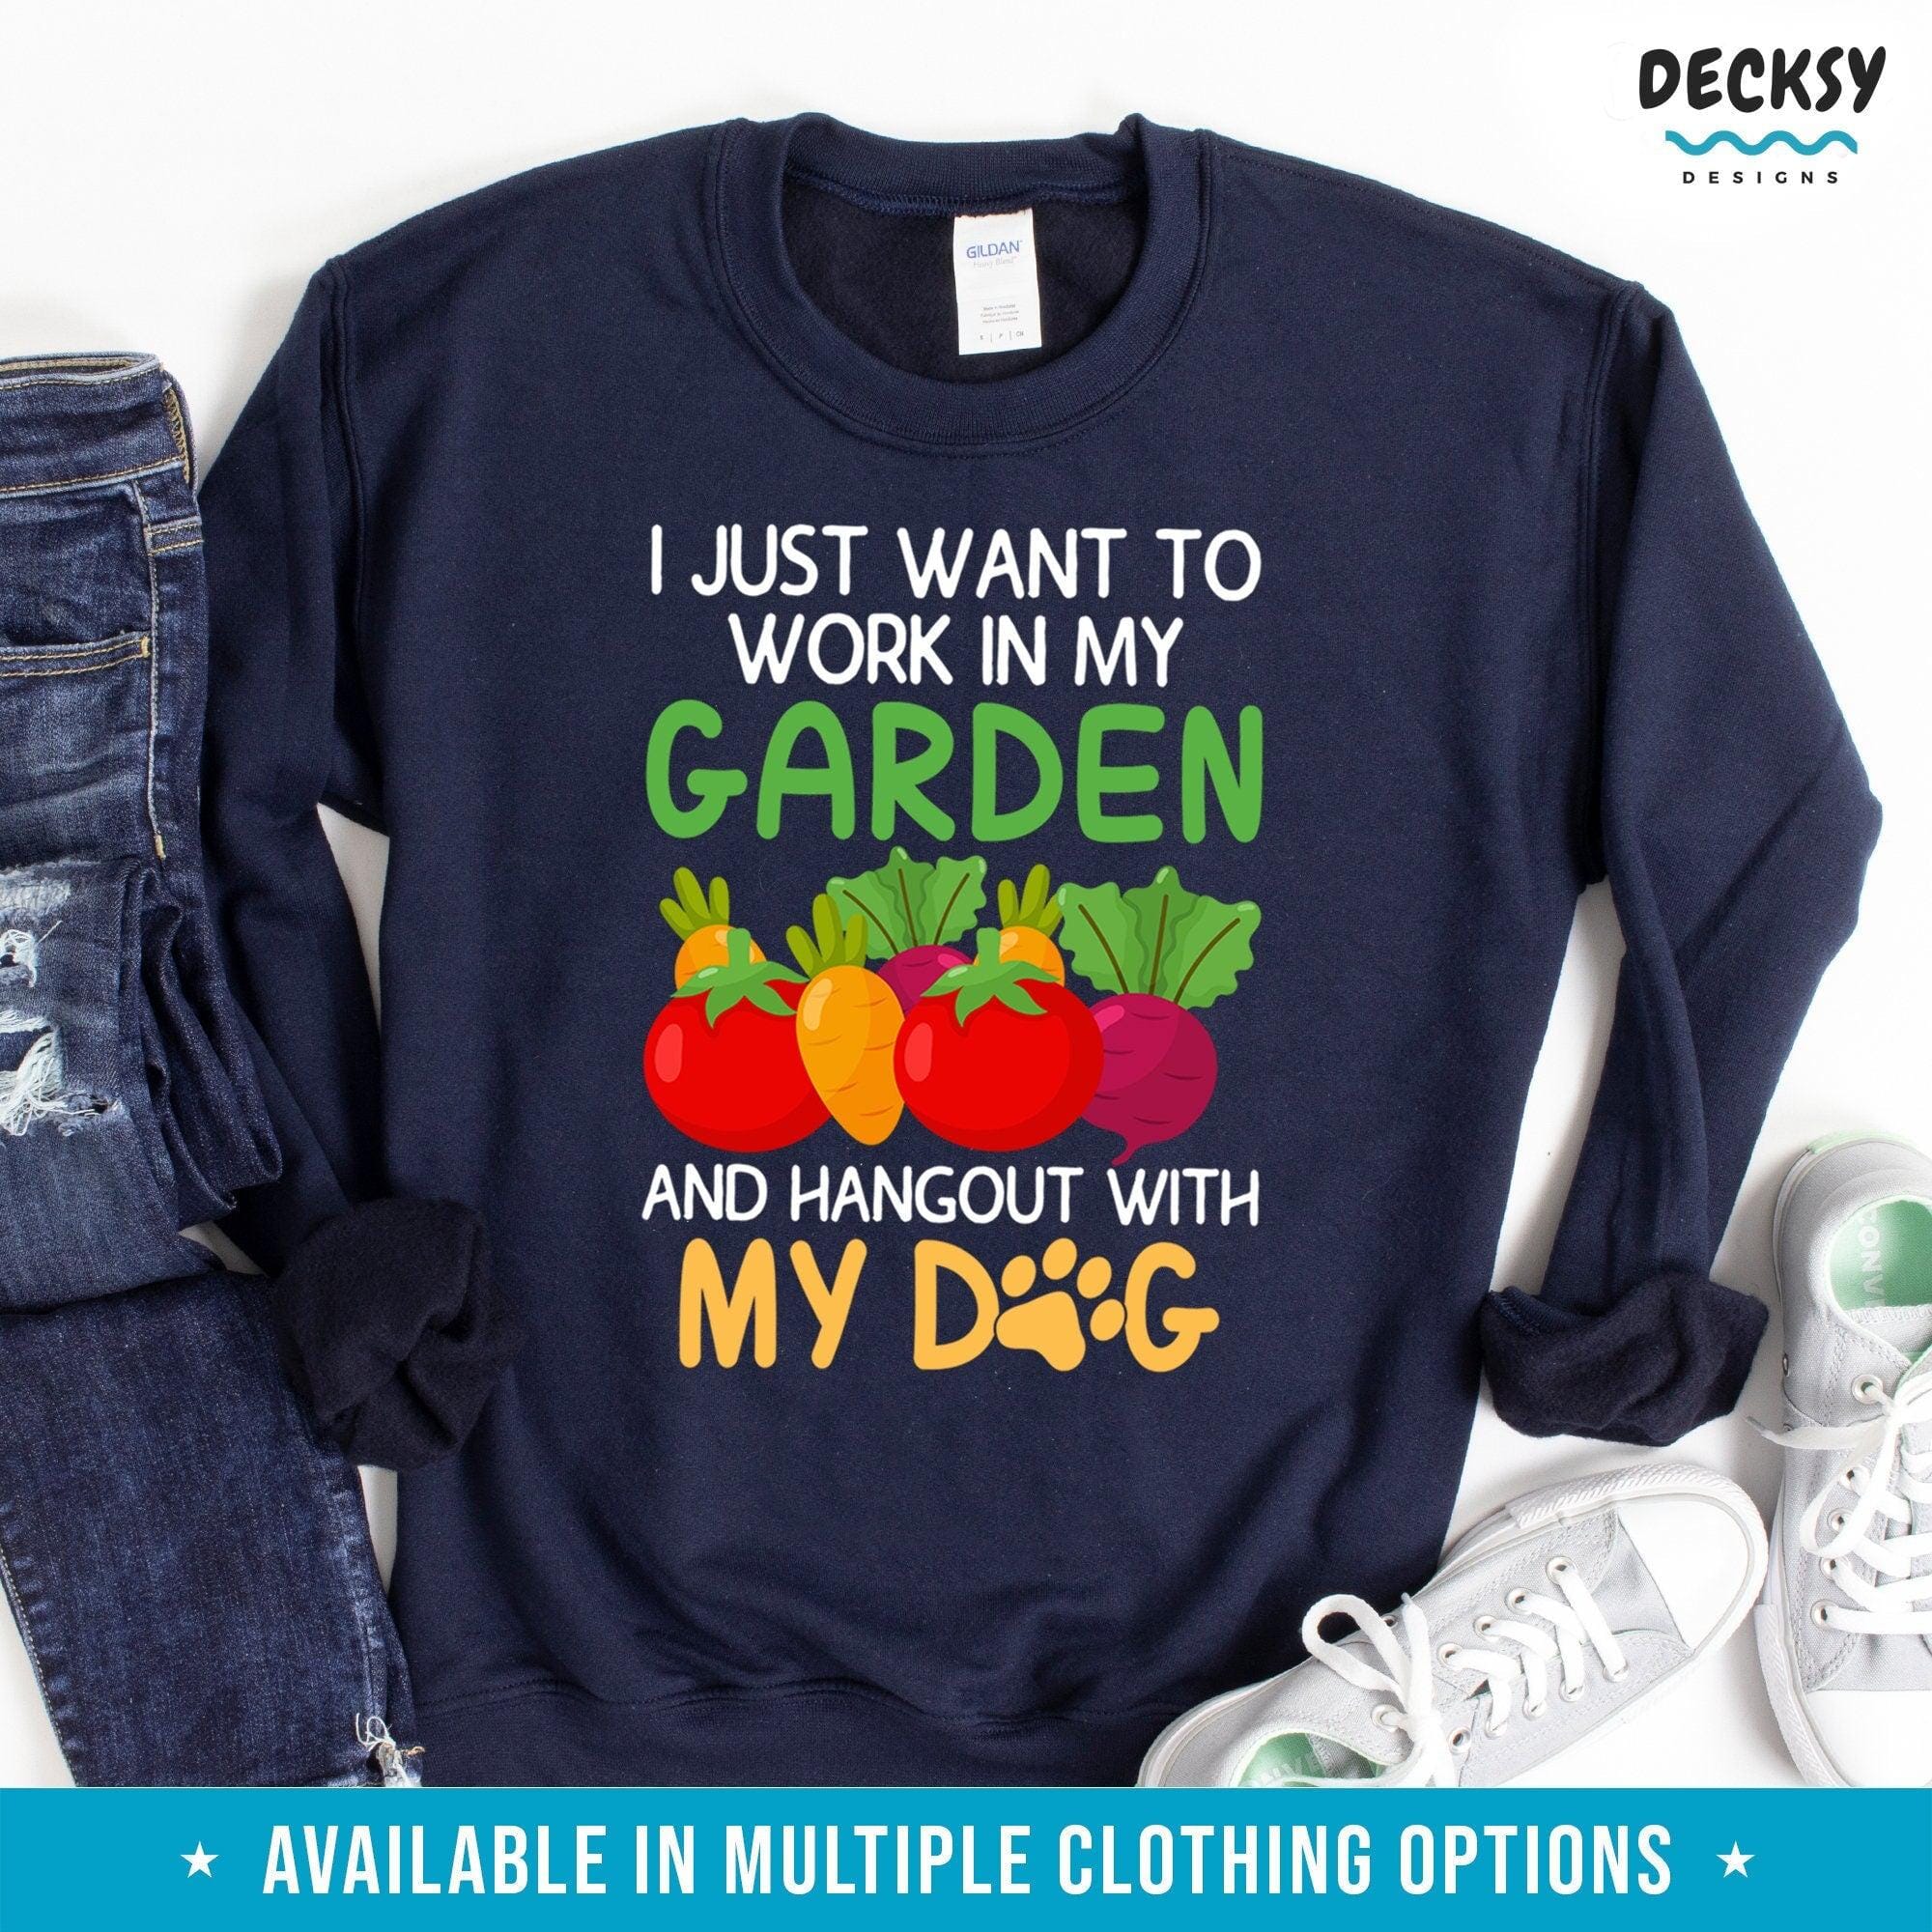 Gardening Shirt, Dog Owner Gift-Clothing:Gender-Neutral Adult Clothing:Tops & Tees:T-shirts:Graphic Tees-DecksyDesigns